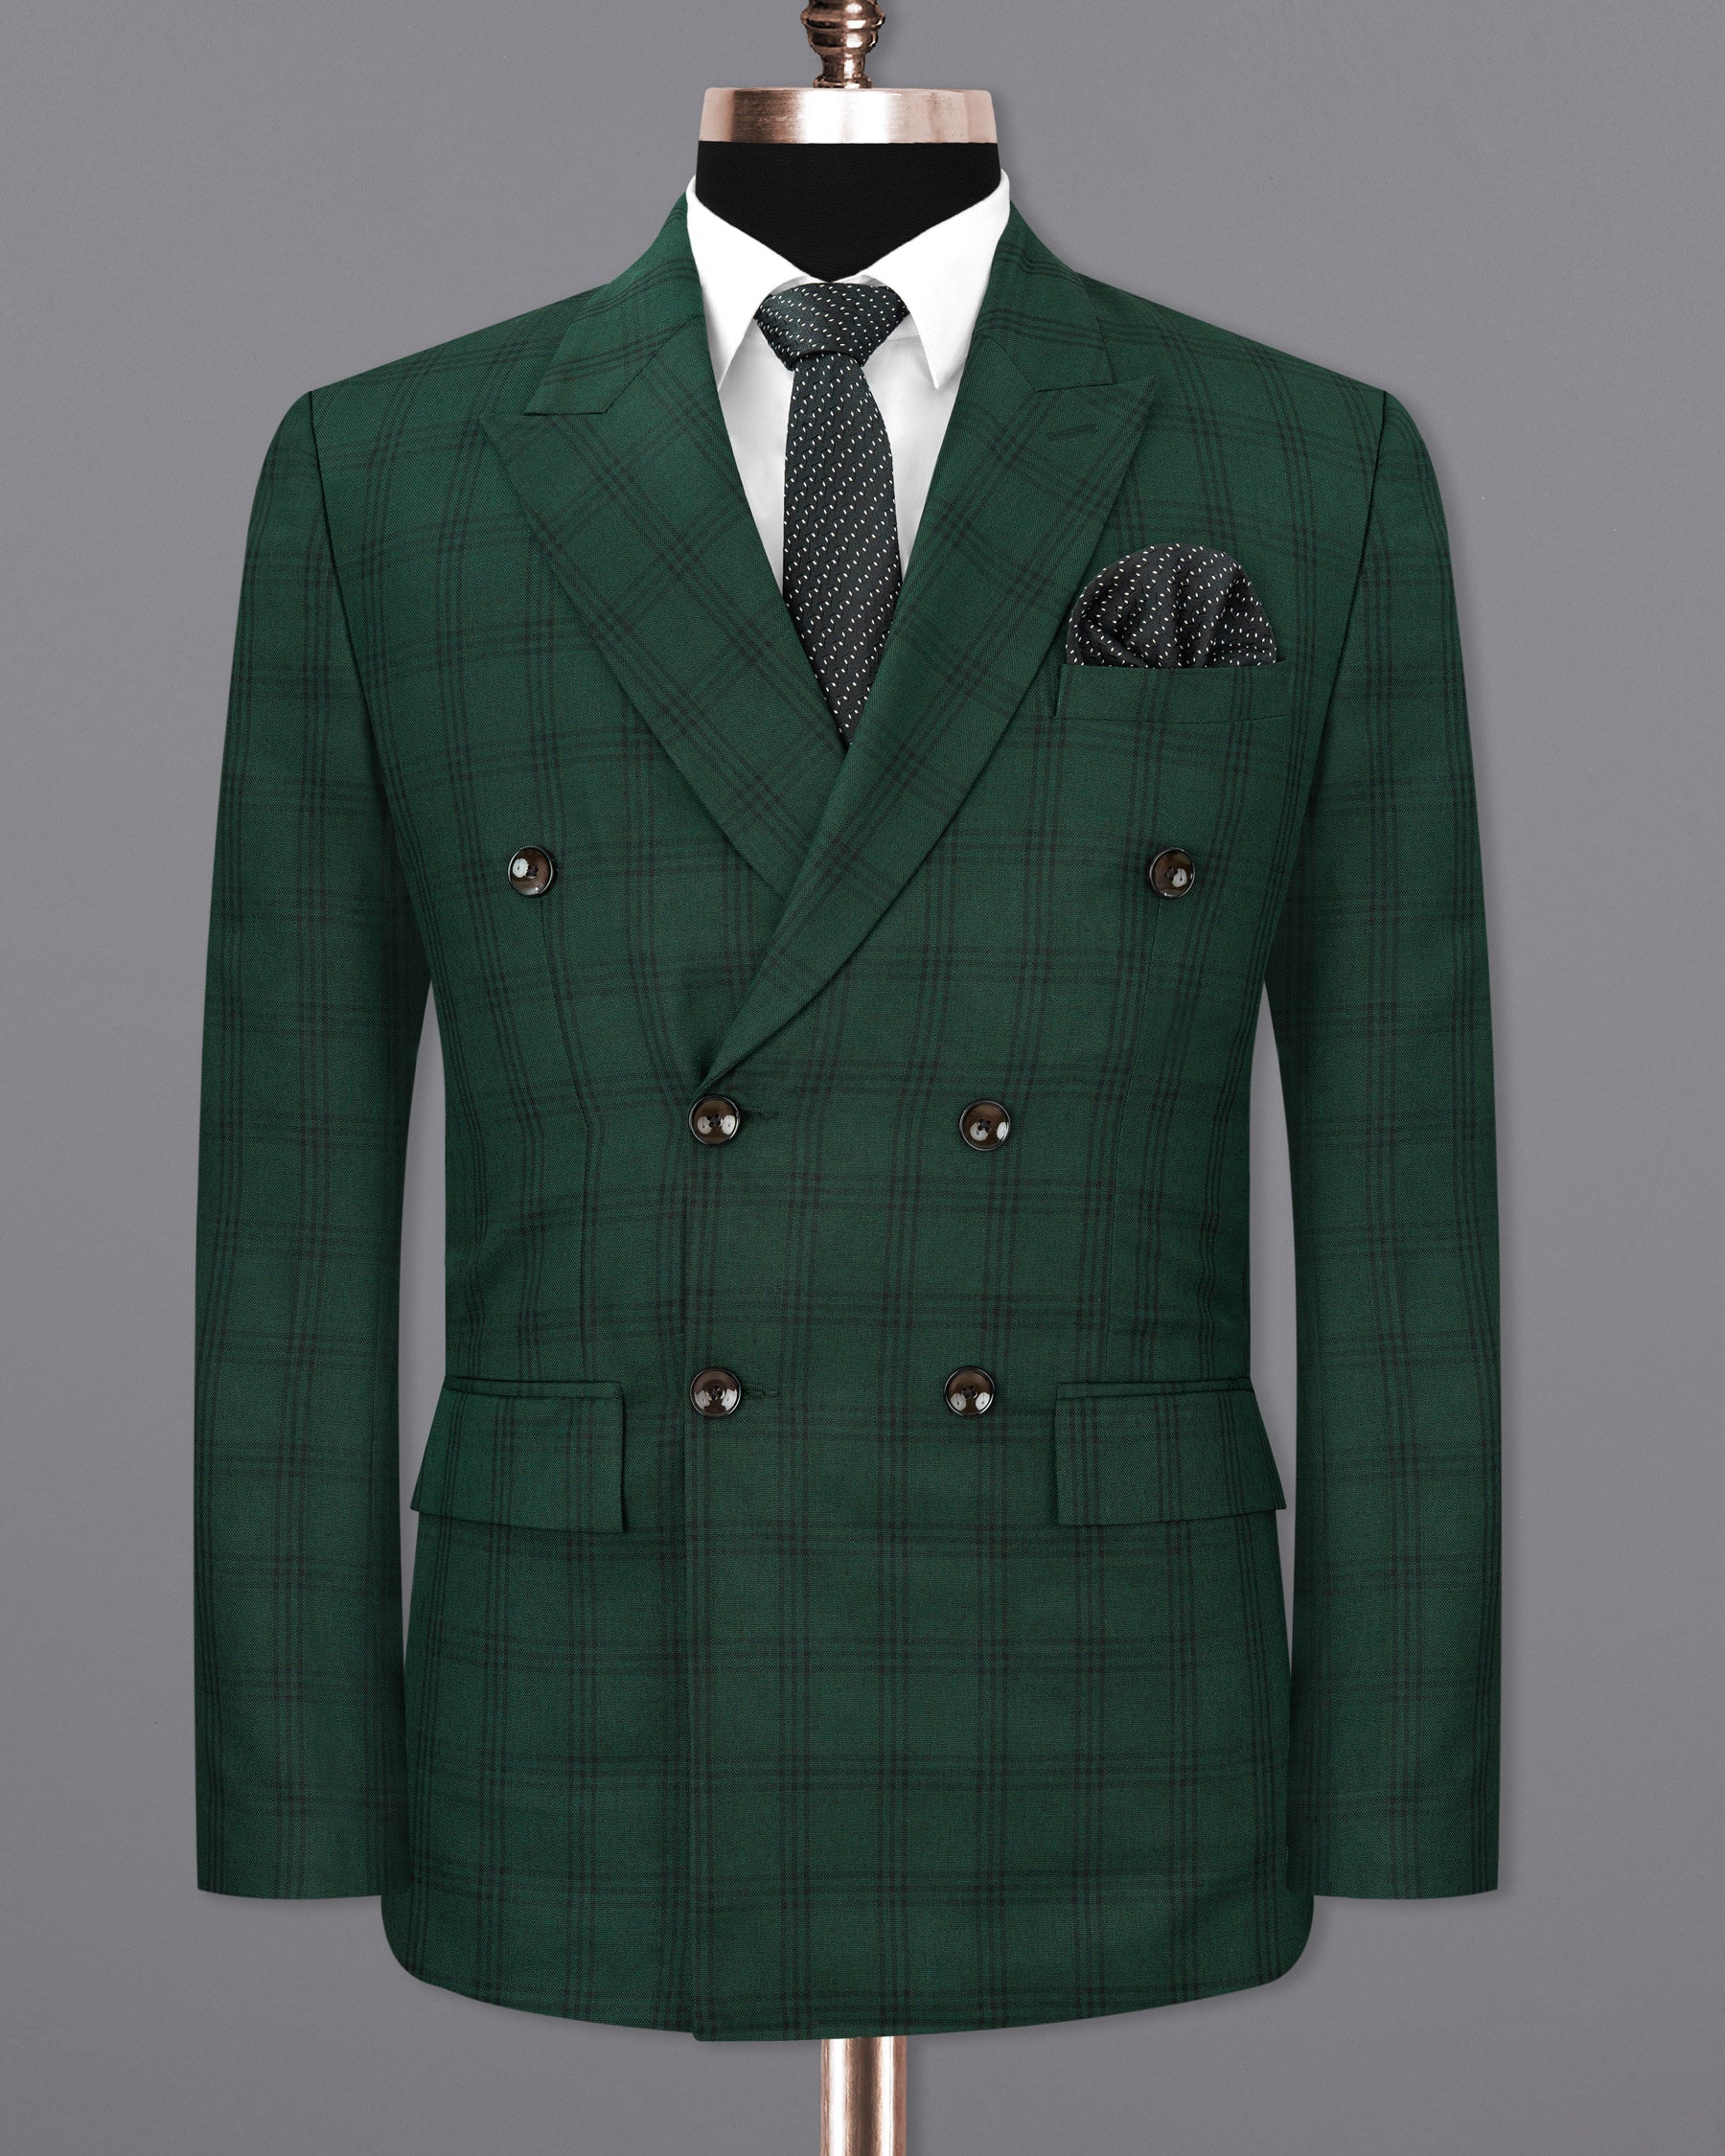 Phthalo Green Windowpane Double Breasted Blazer BL1722-DB-36,BL1722-DB-38,BL1722-DB-40,BL1722-DB-42,BL1722-DB-44,BL1722-DB-46,BL1722-DB-48,BL1722-DB-50,BL1722-DB-52,BL1722-DB-54,BL1722-DB-56,BL1722-DB-58,BL1722-DB-60